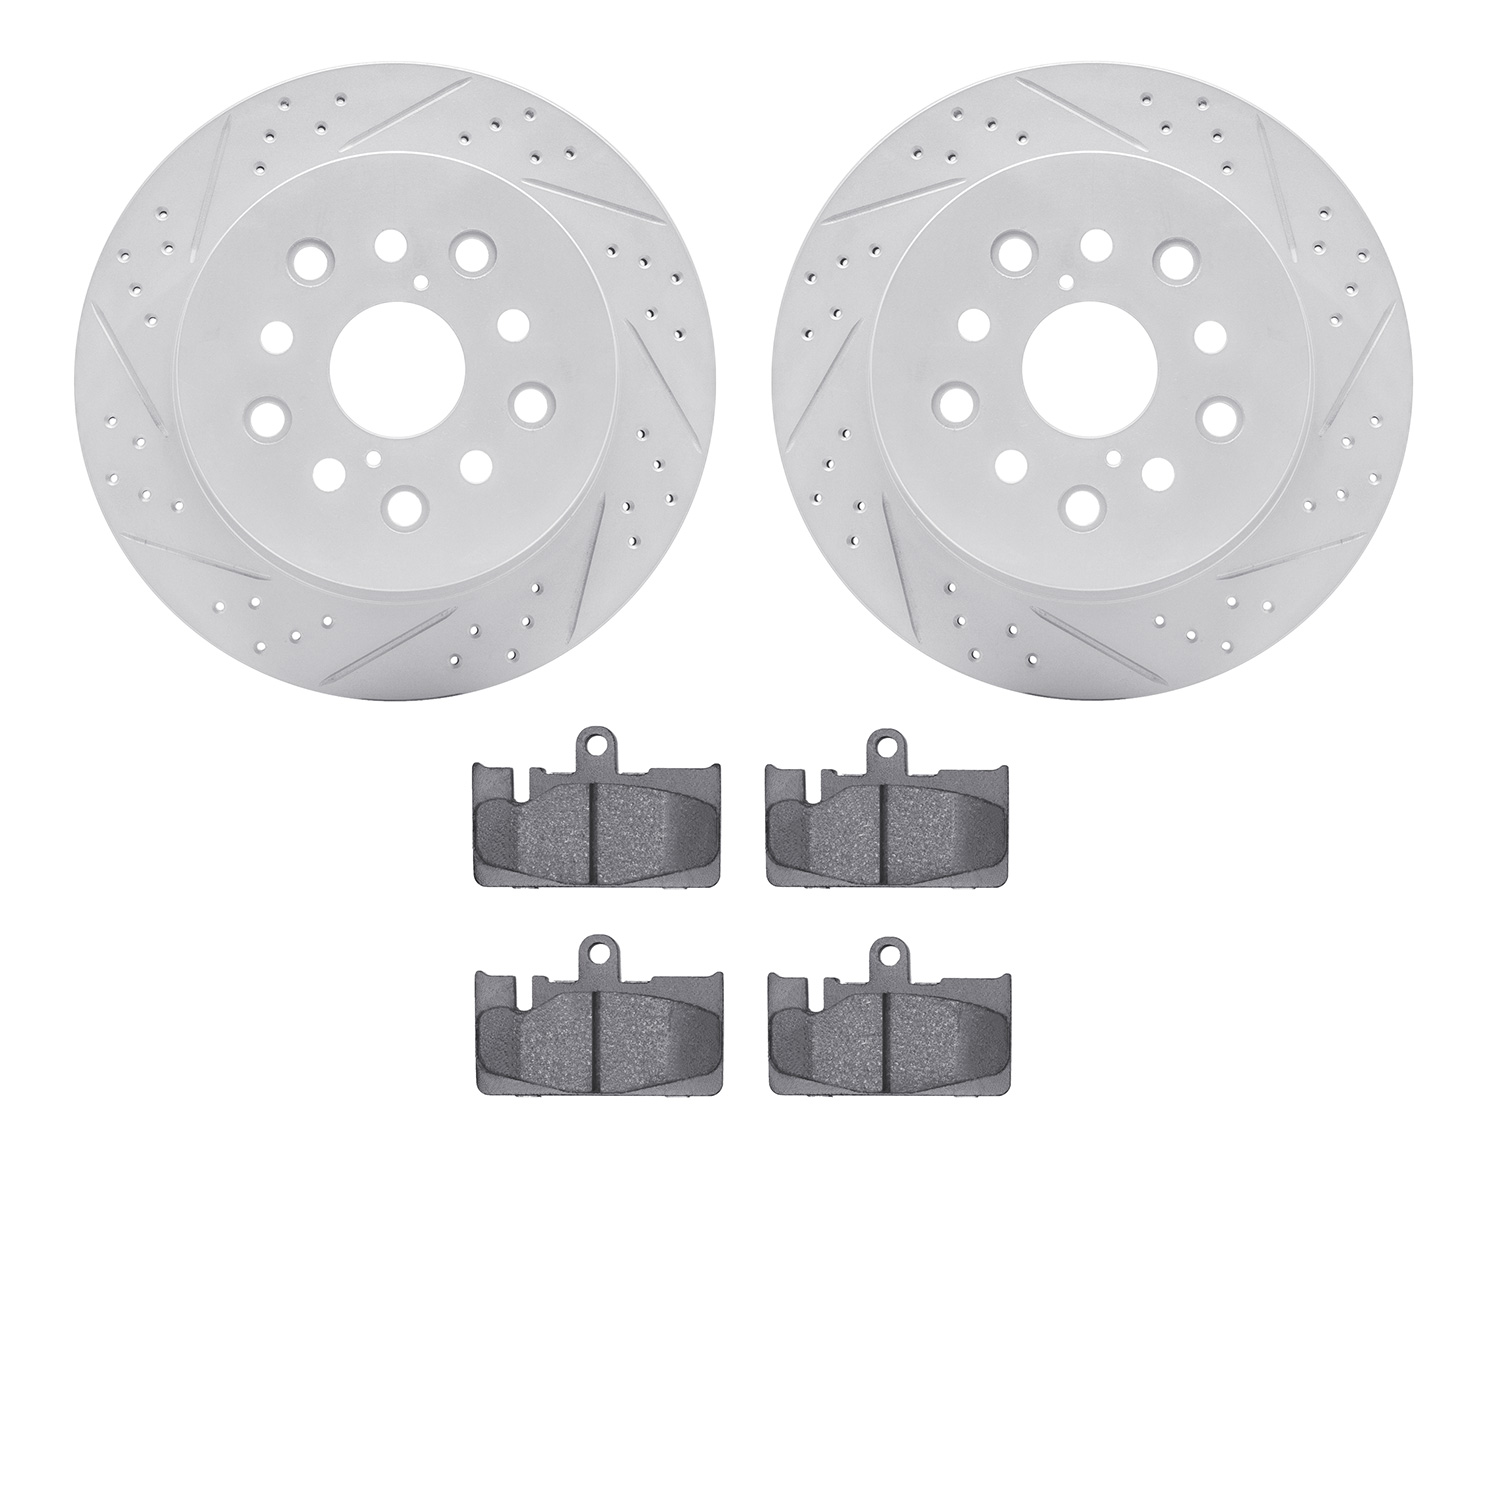 2502-75008 Geoperformance Drilled/Slotted Rotors w/5000 Advanced Brake Pads Kit, 2001-2006 Lexus/Toyota/Scion, Position: Rear